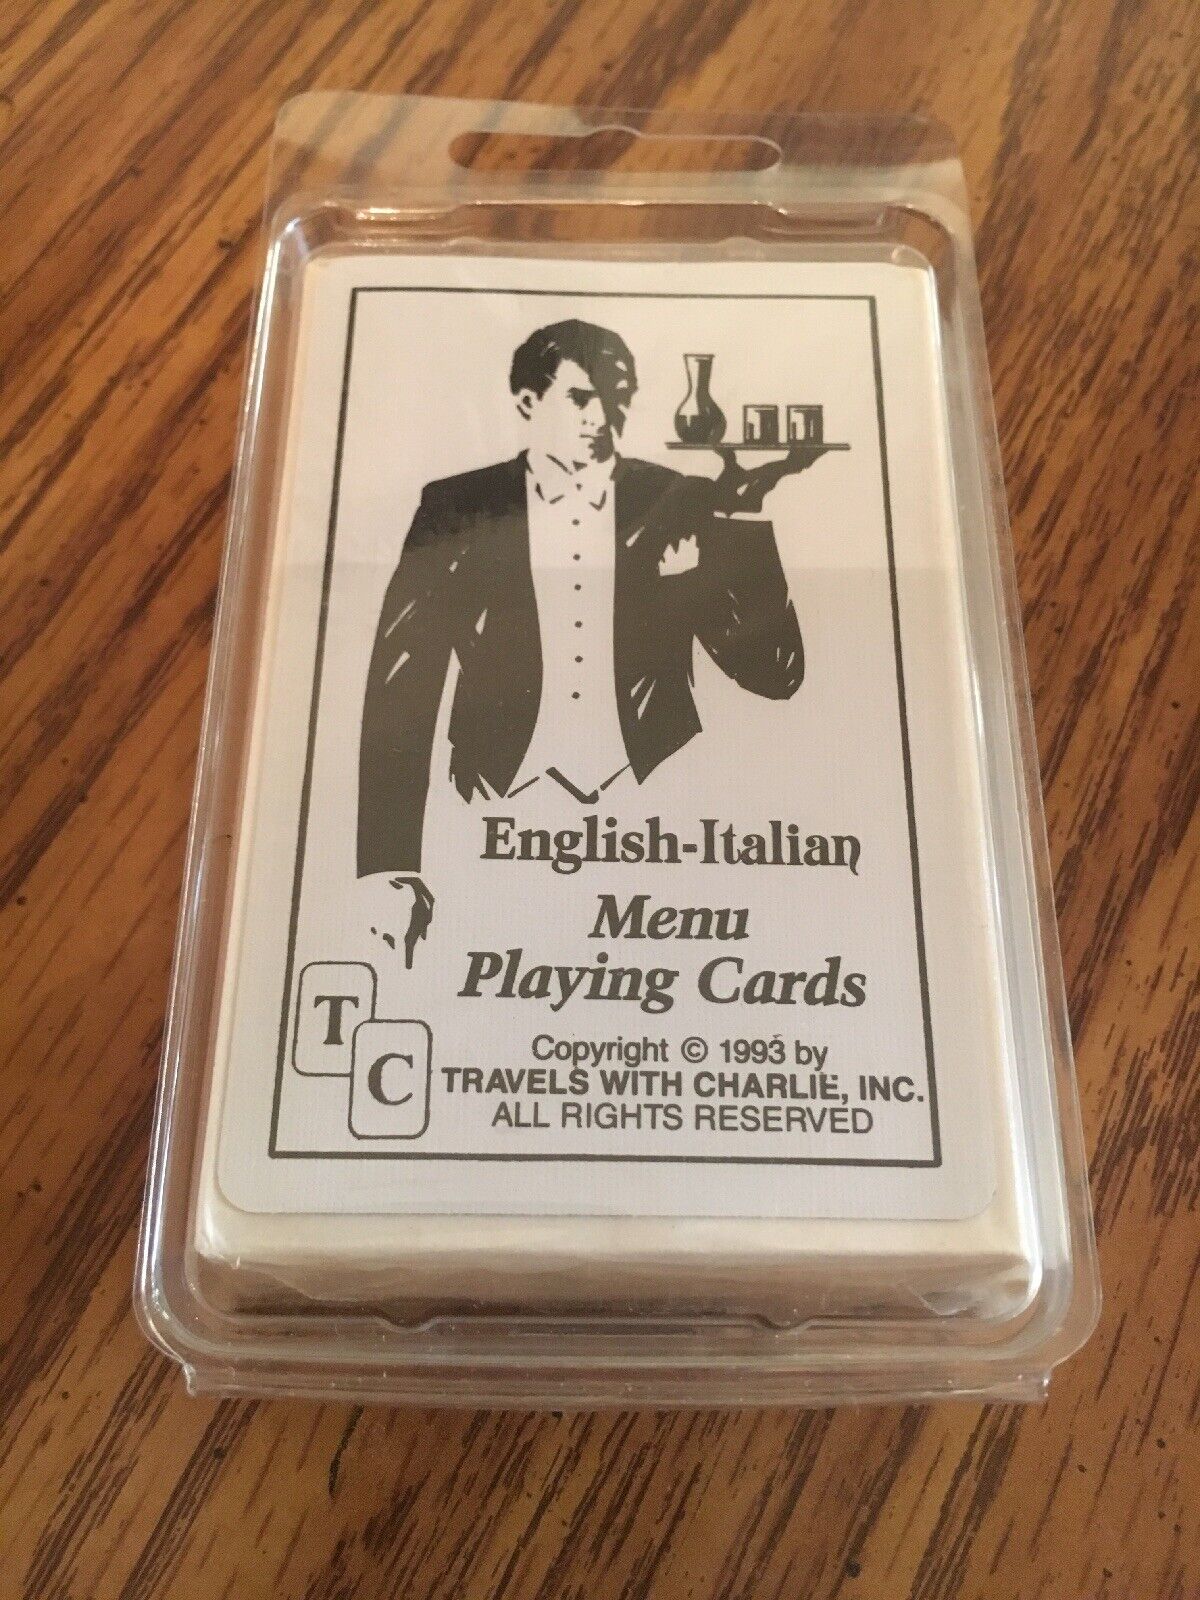 English-Italian Menu Playing Cards 1993 Travels With Charlie Inc. Scarce New